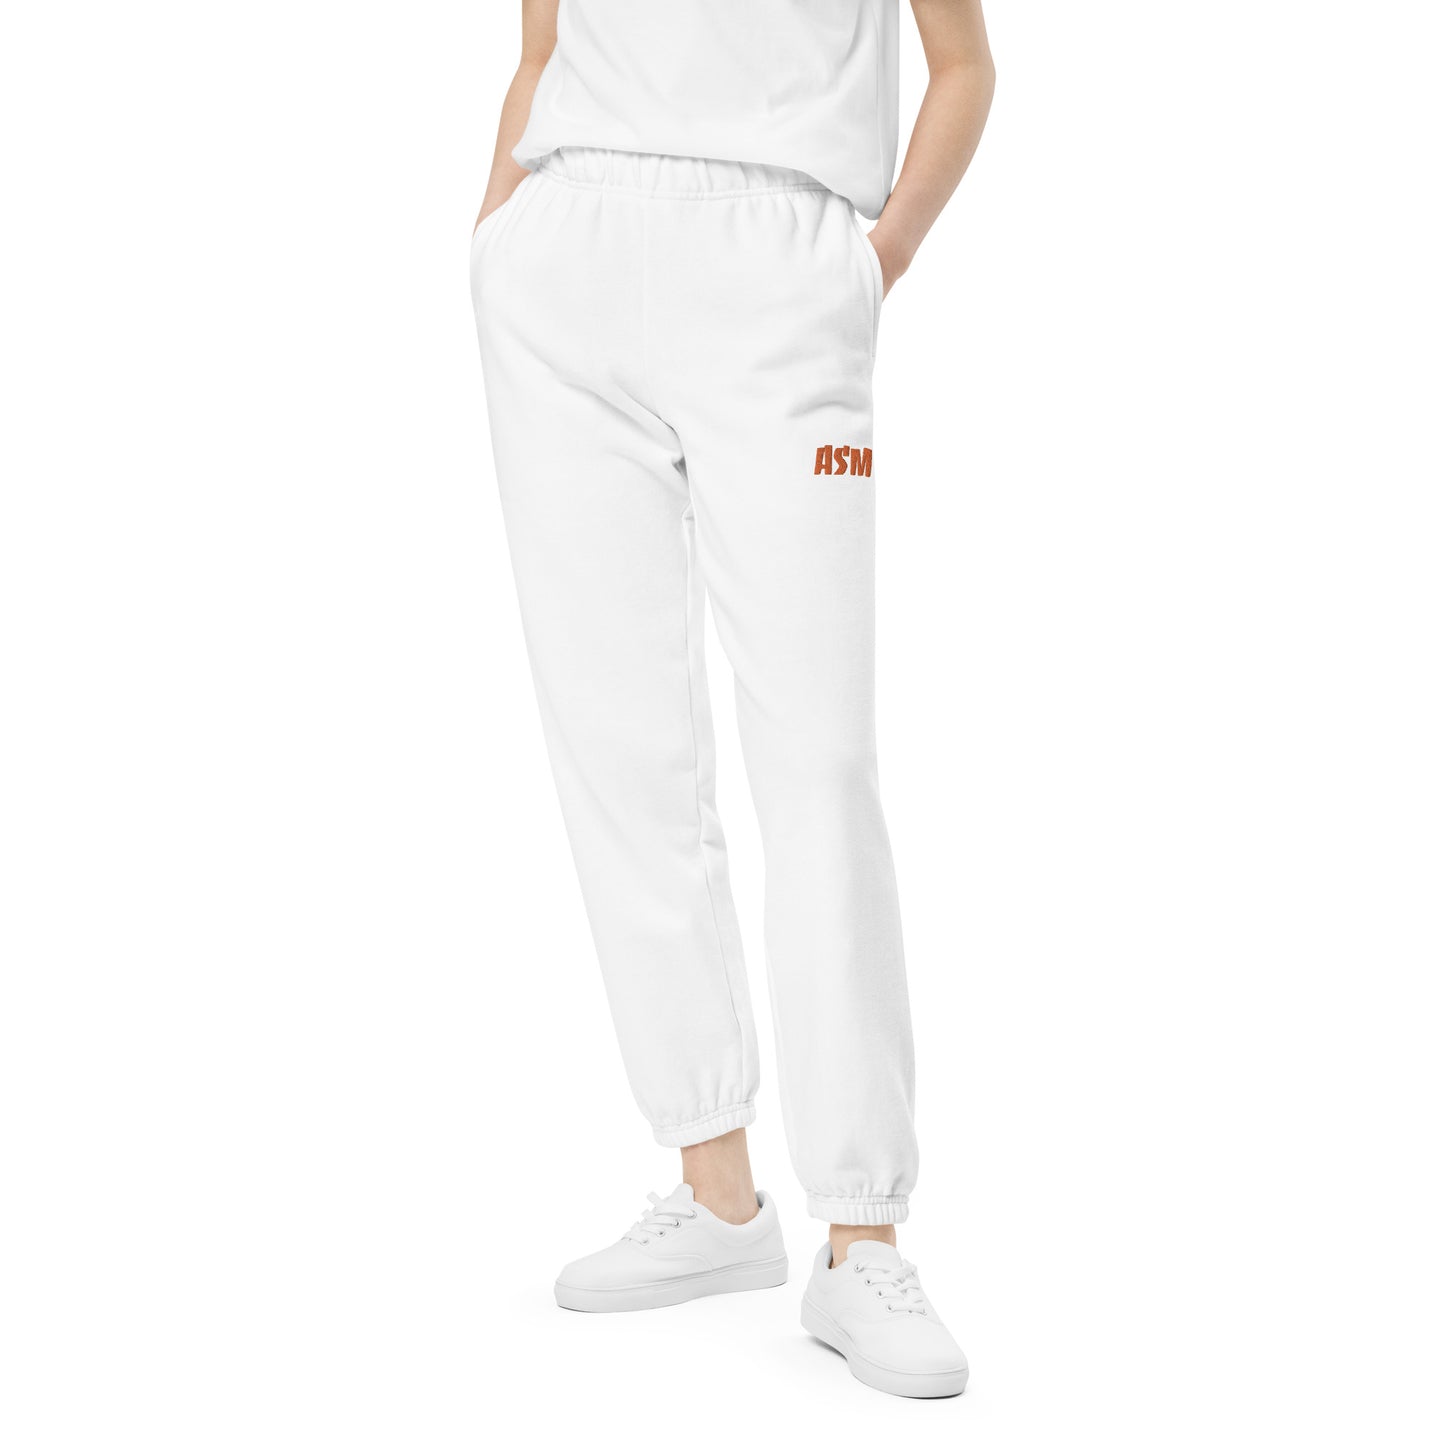 Comfort Sweatpants "ASM" (Only East Asia)